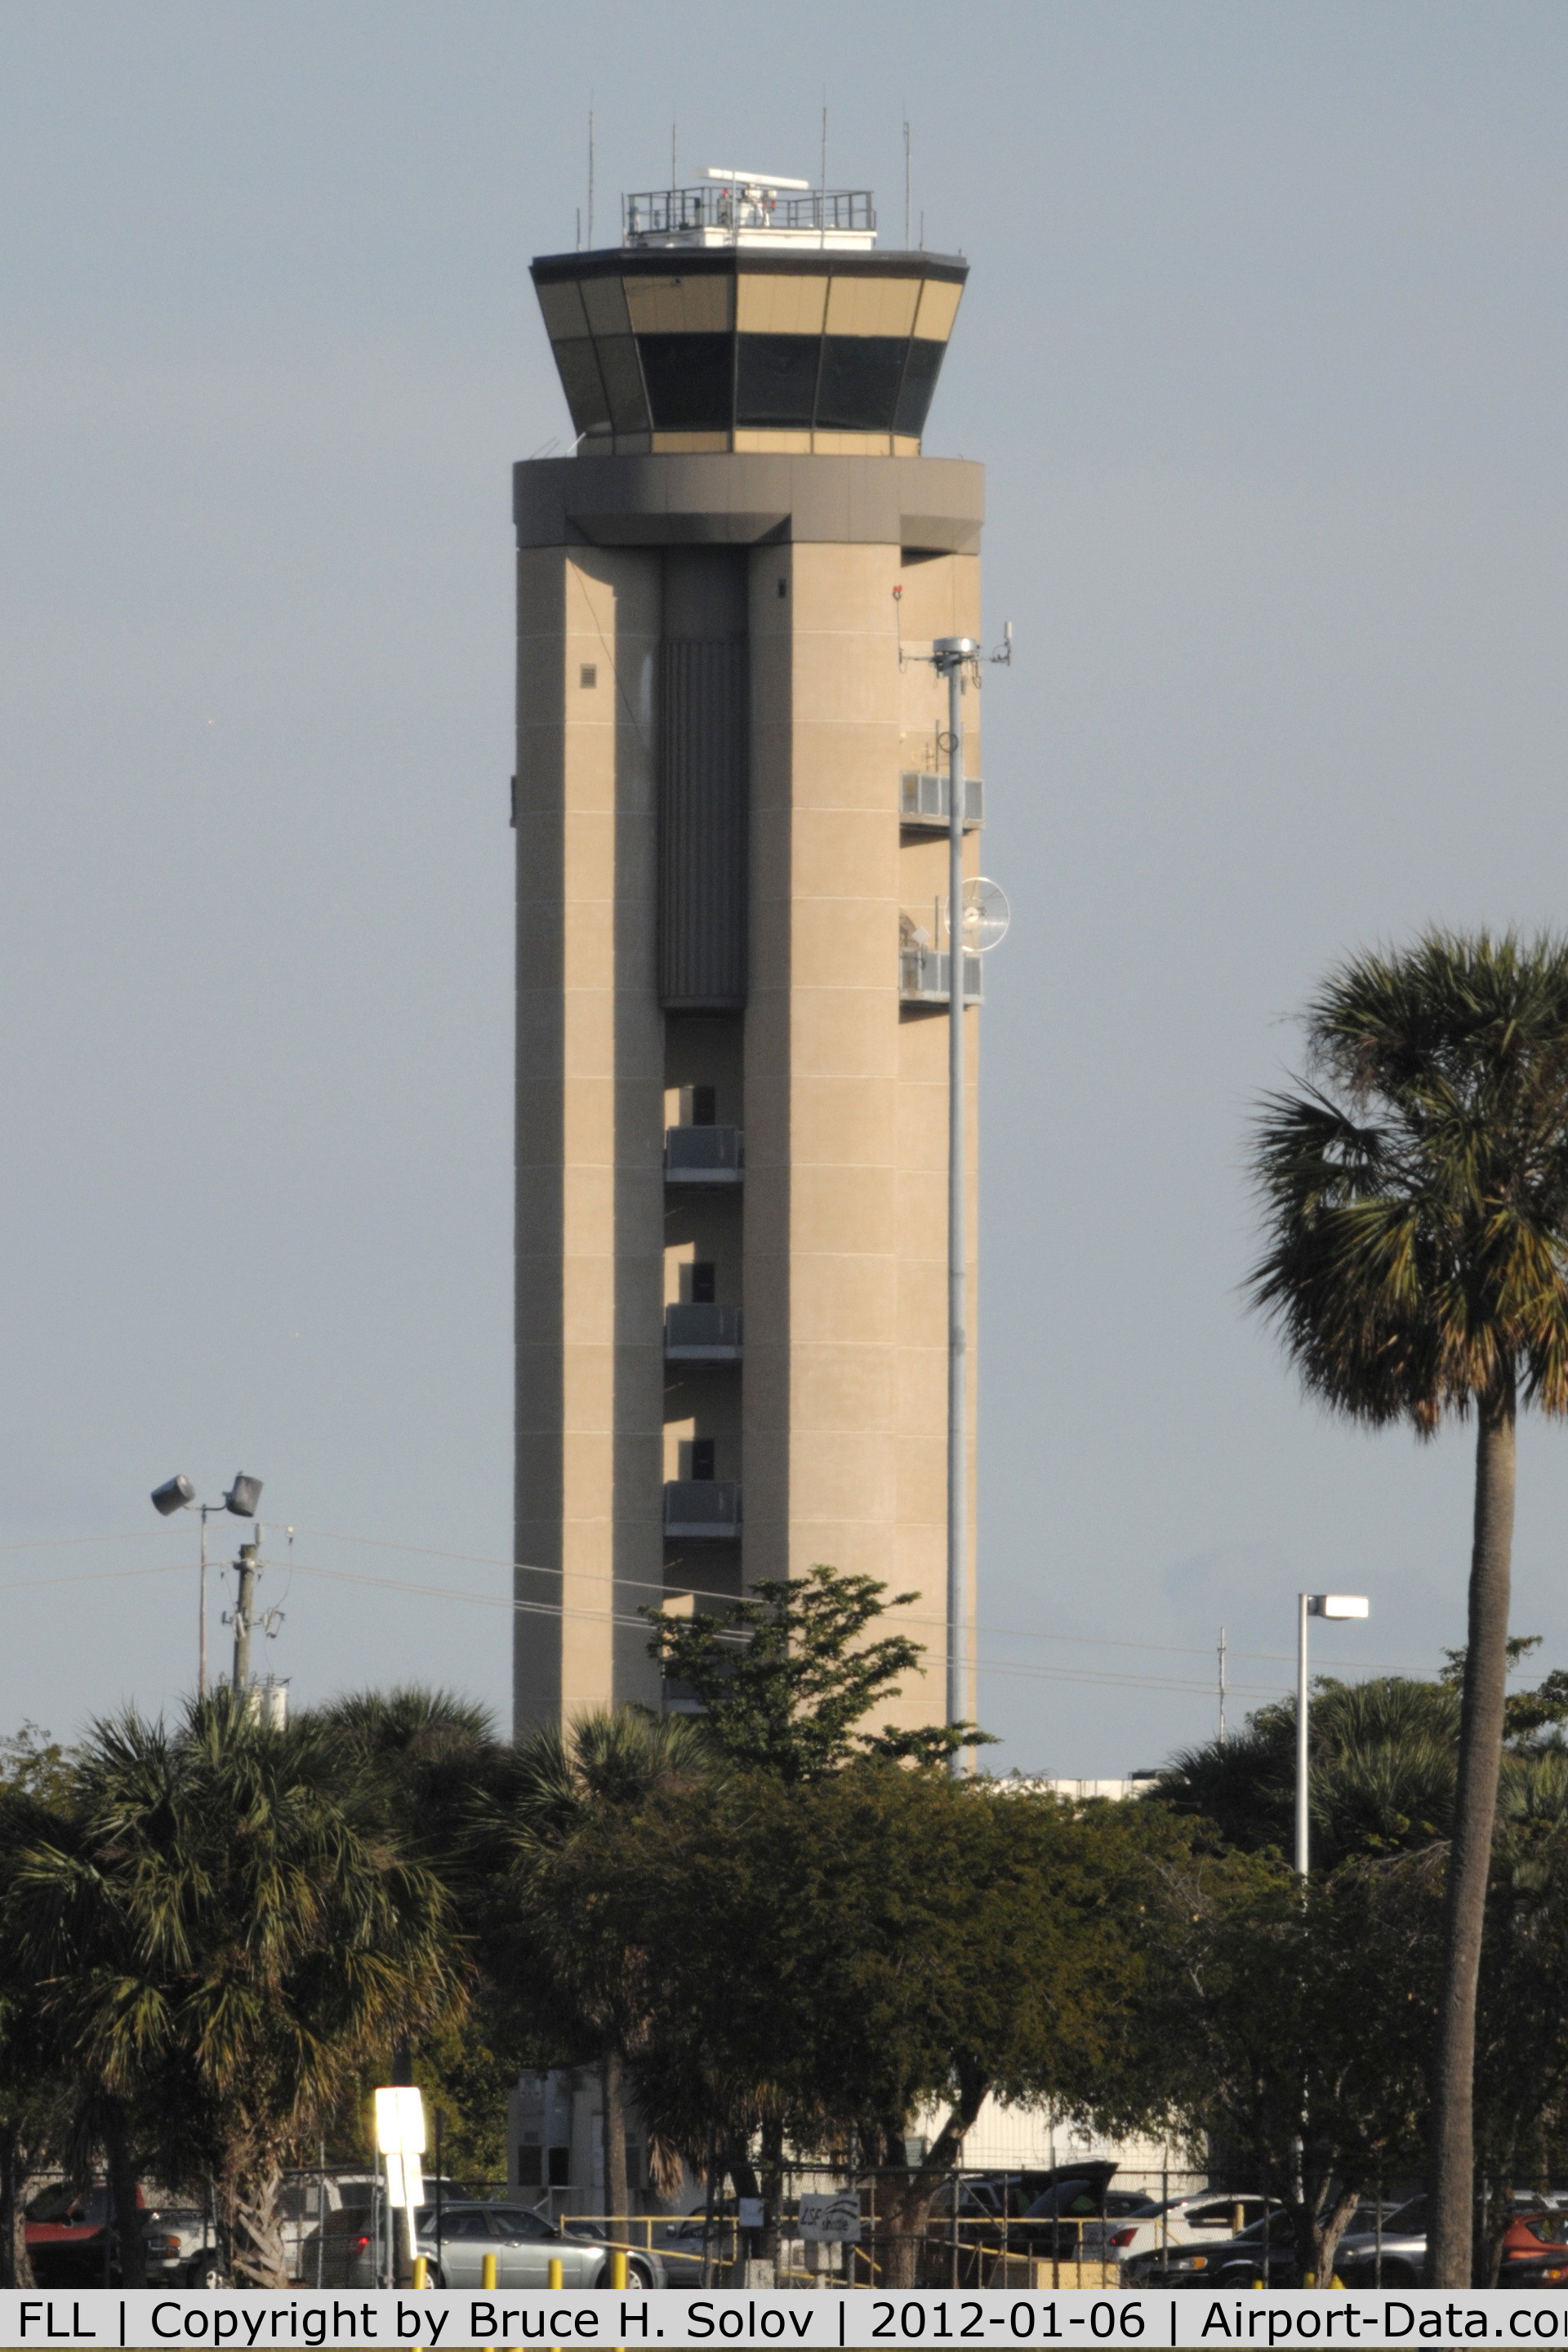 Fort Lauderdale/hollywood International Airport (FLL) - The air traffic control tower at Ft. Lauderdale Hollywood International Airport